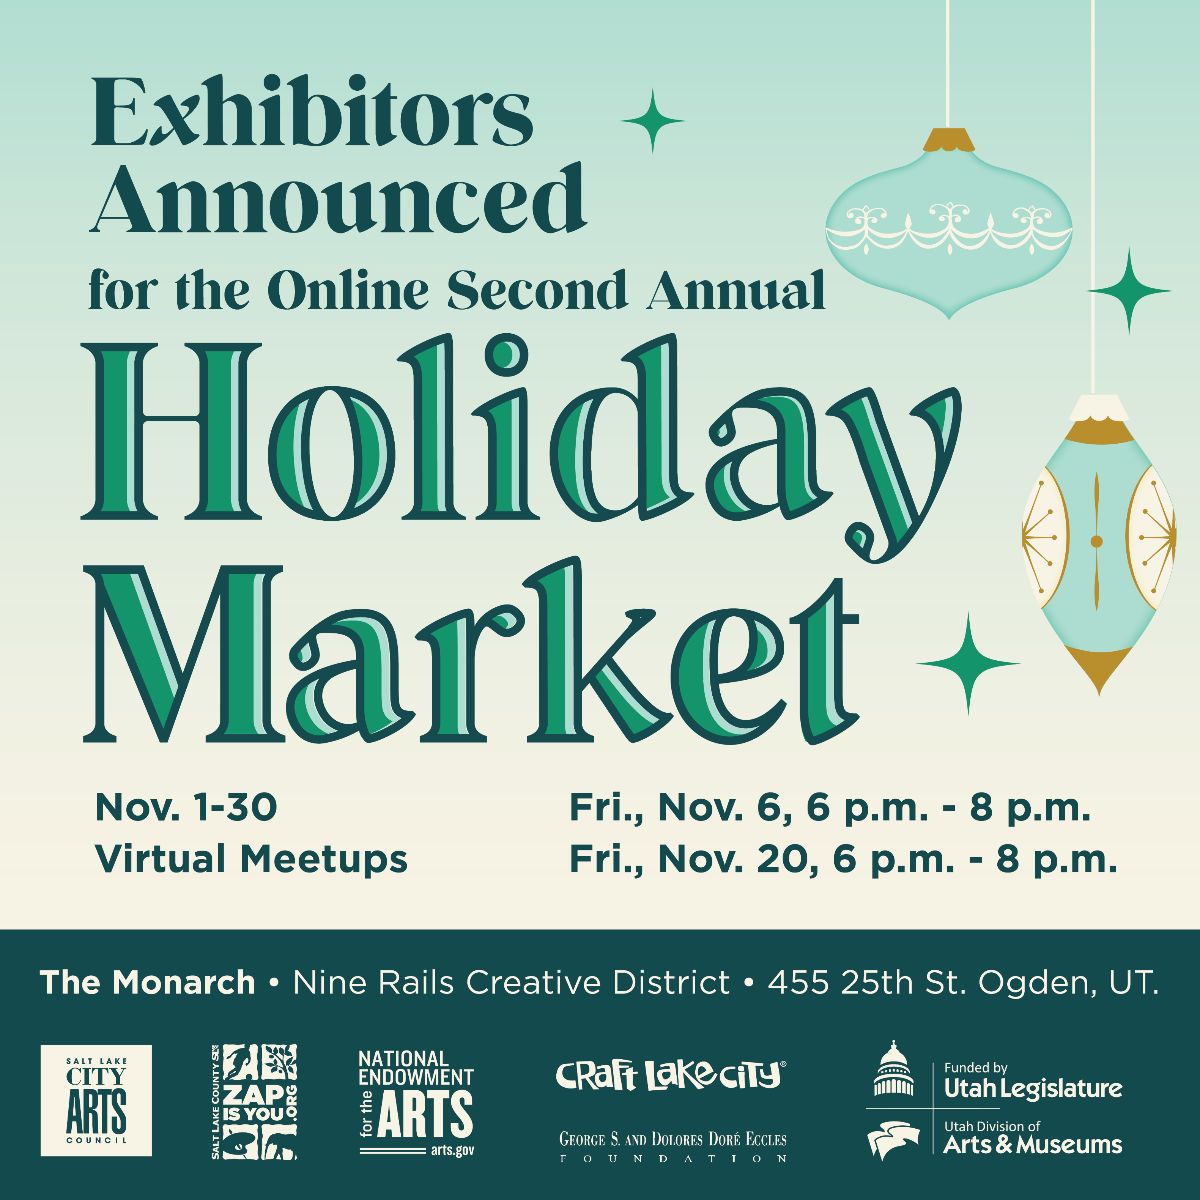 Craft Lake City Announces Accepted Exhibitors for the Online Second Annual Craft Lake City Holiday Market!